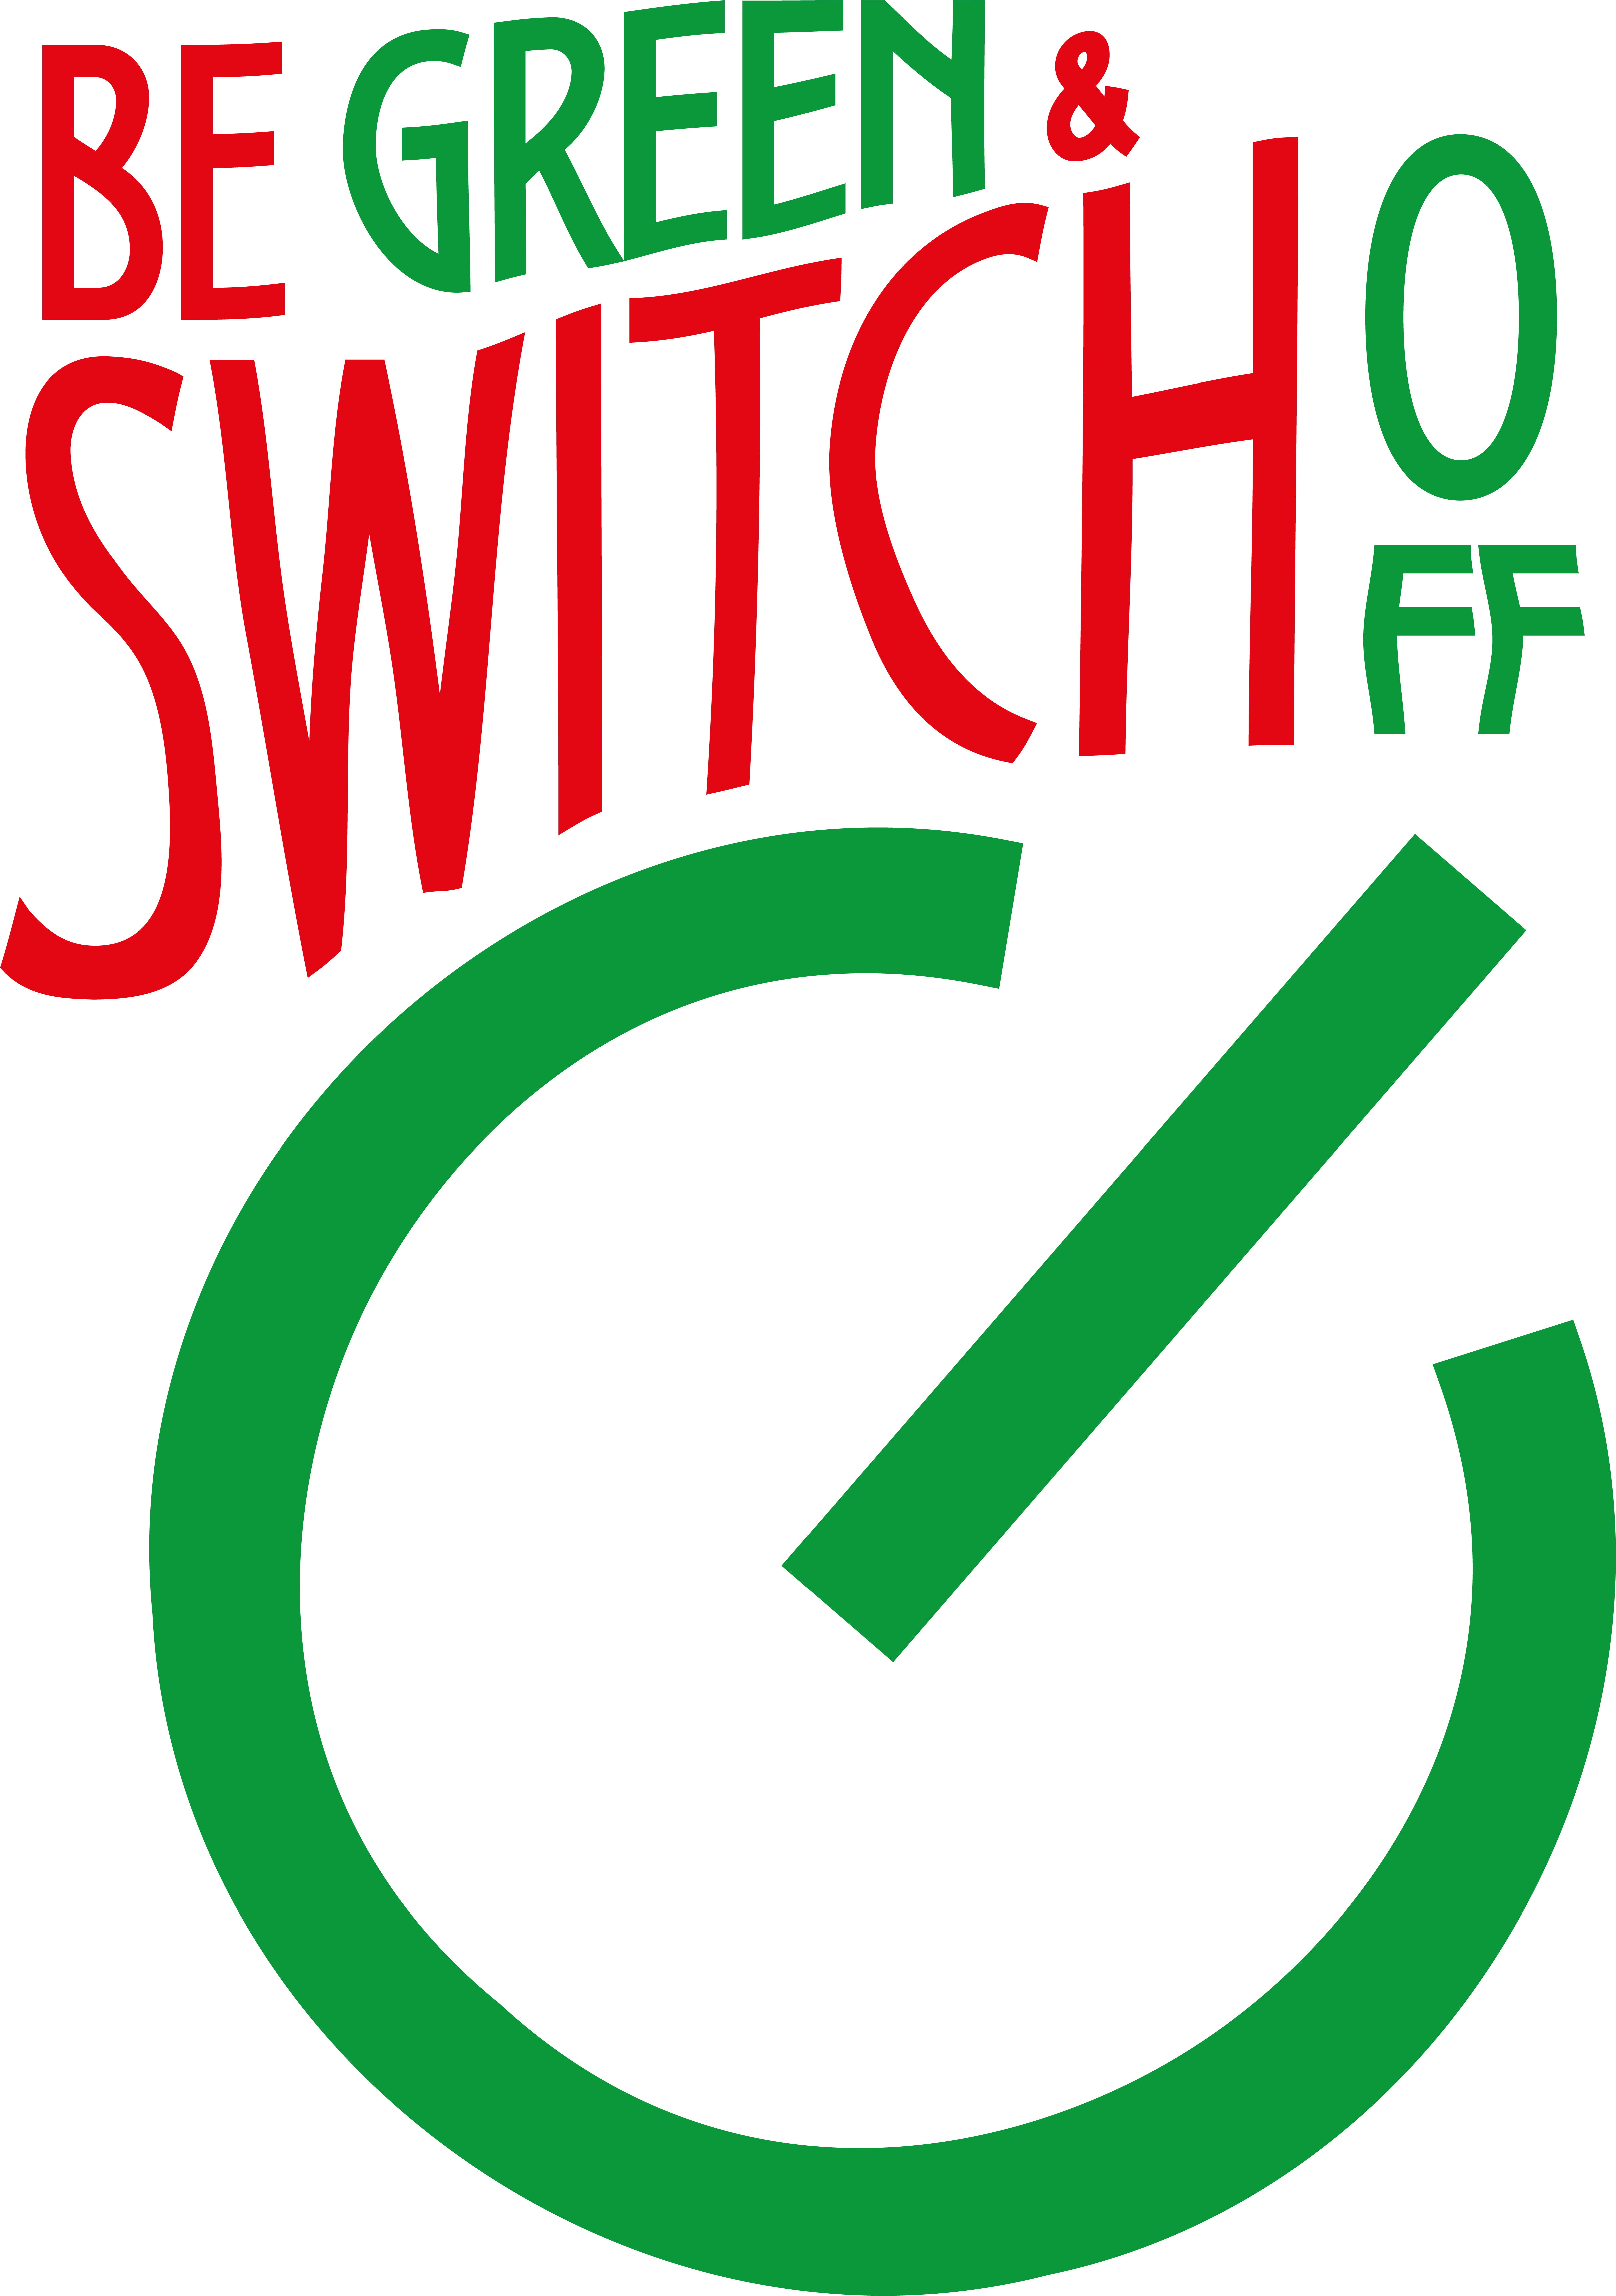 Be Green & Switch Off